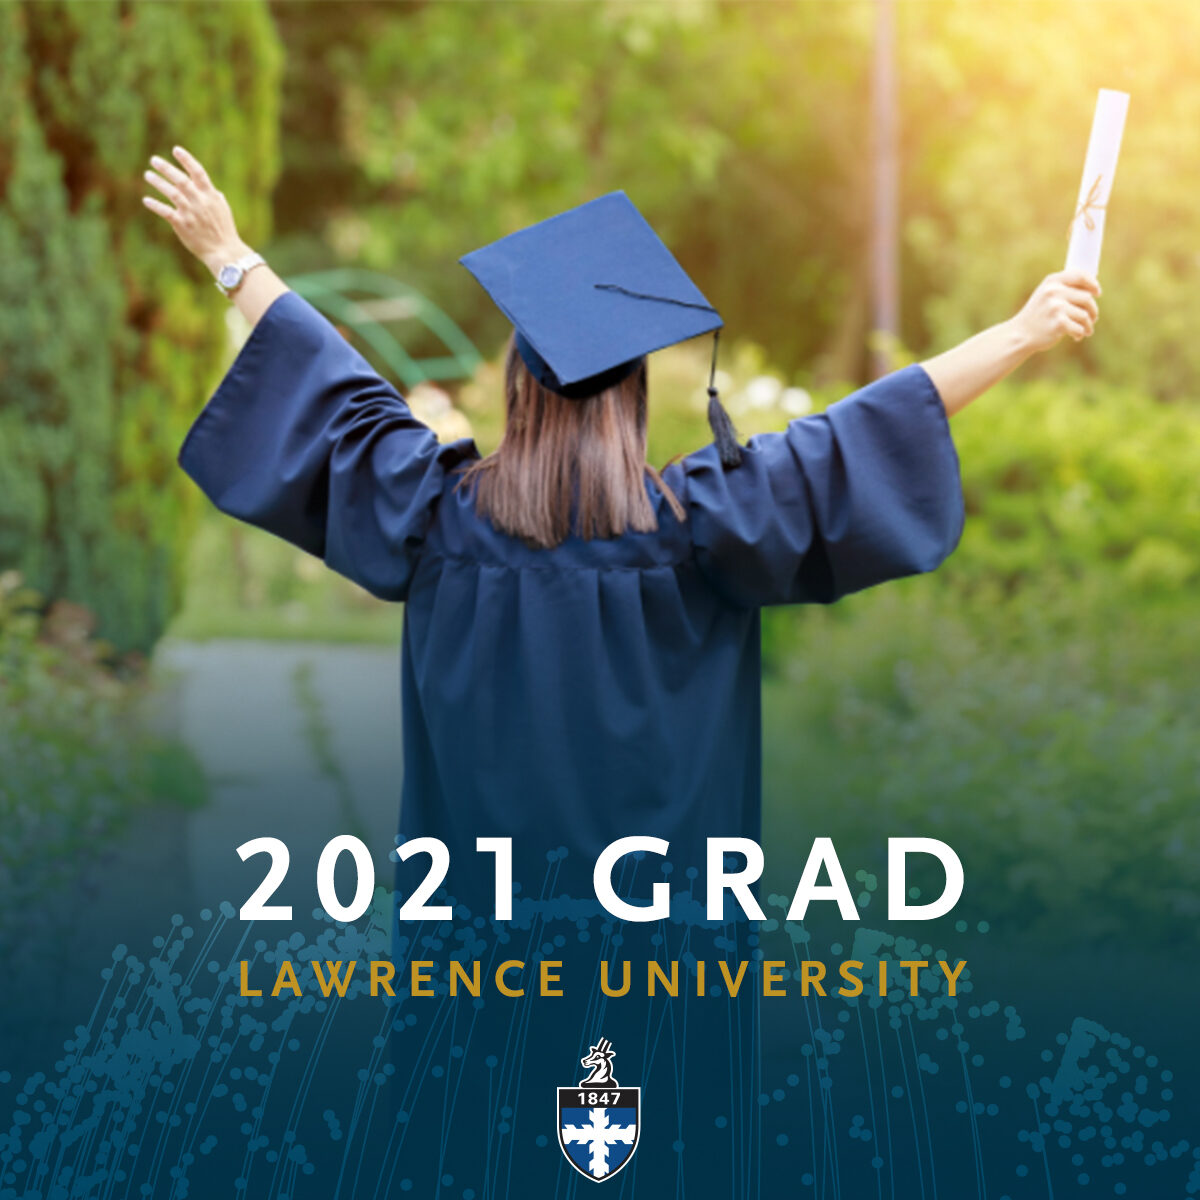 Facebook profile frame featuring graduate in cap and gown. Frame reads: 2021 Grad Lawrence University.